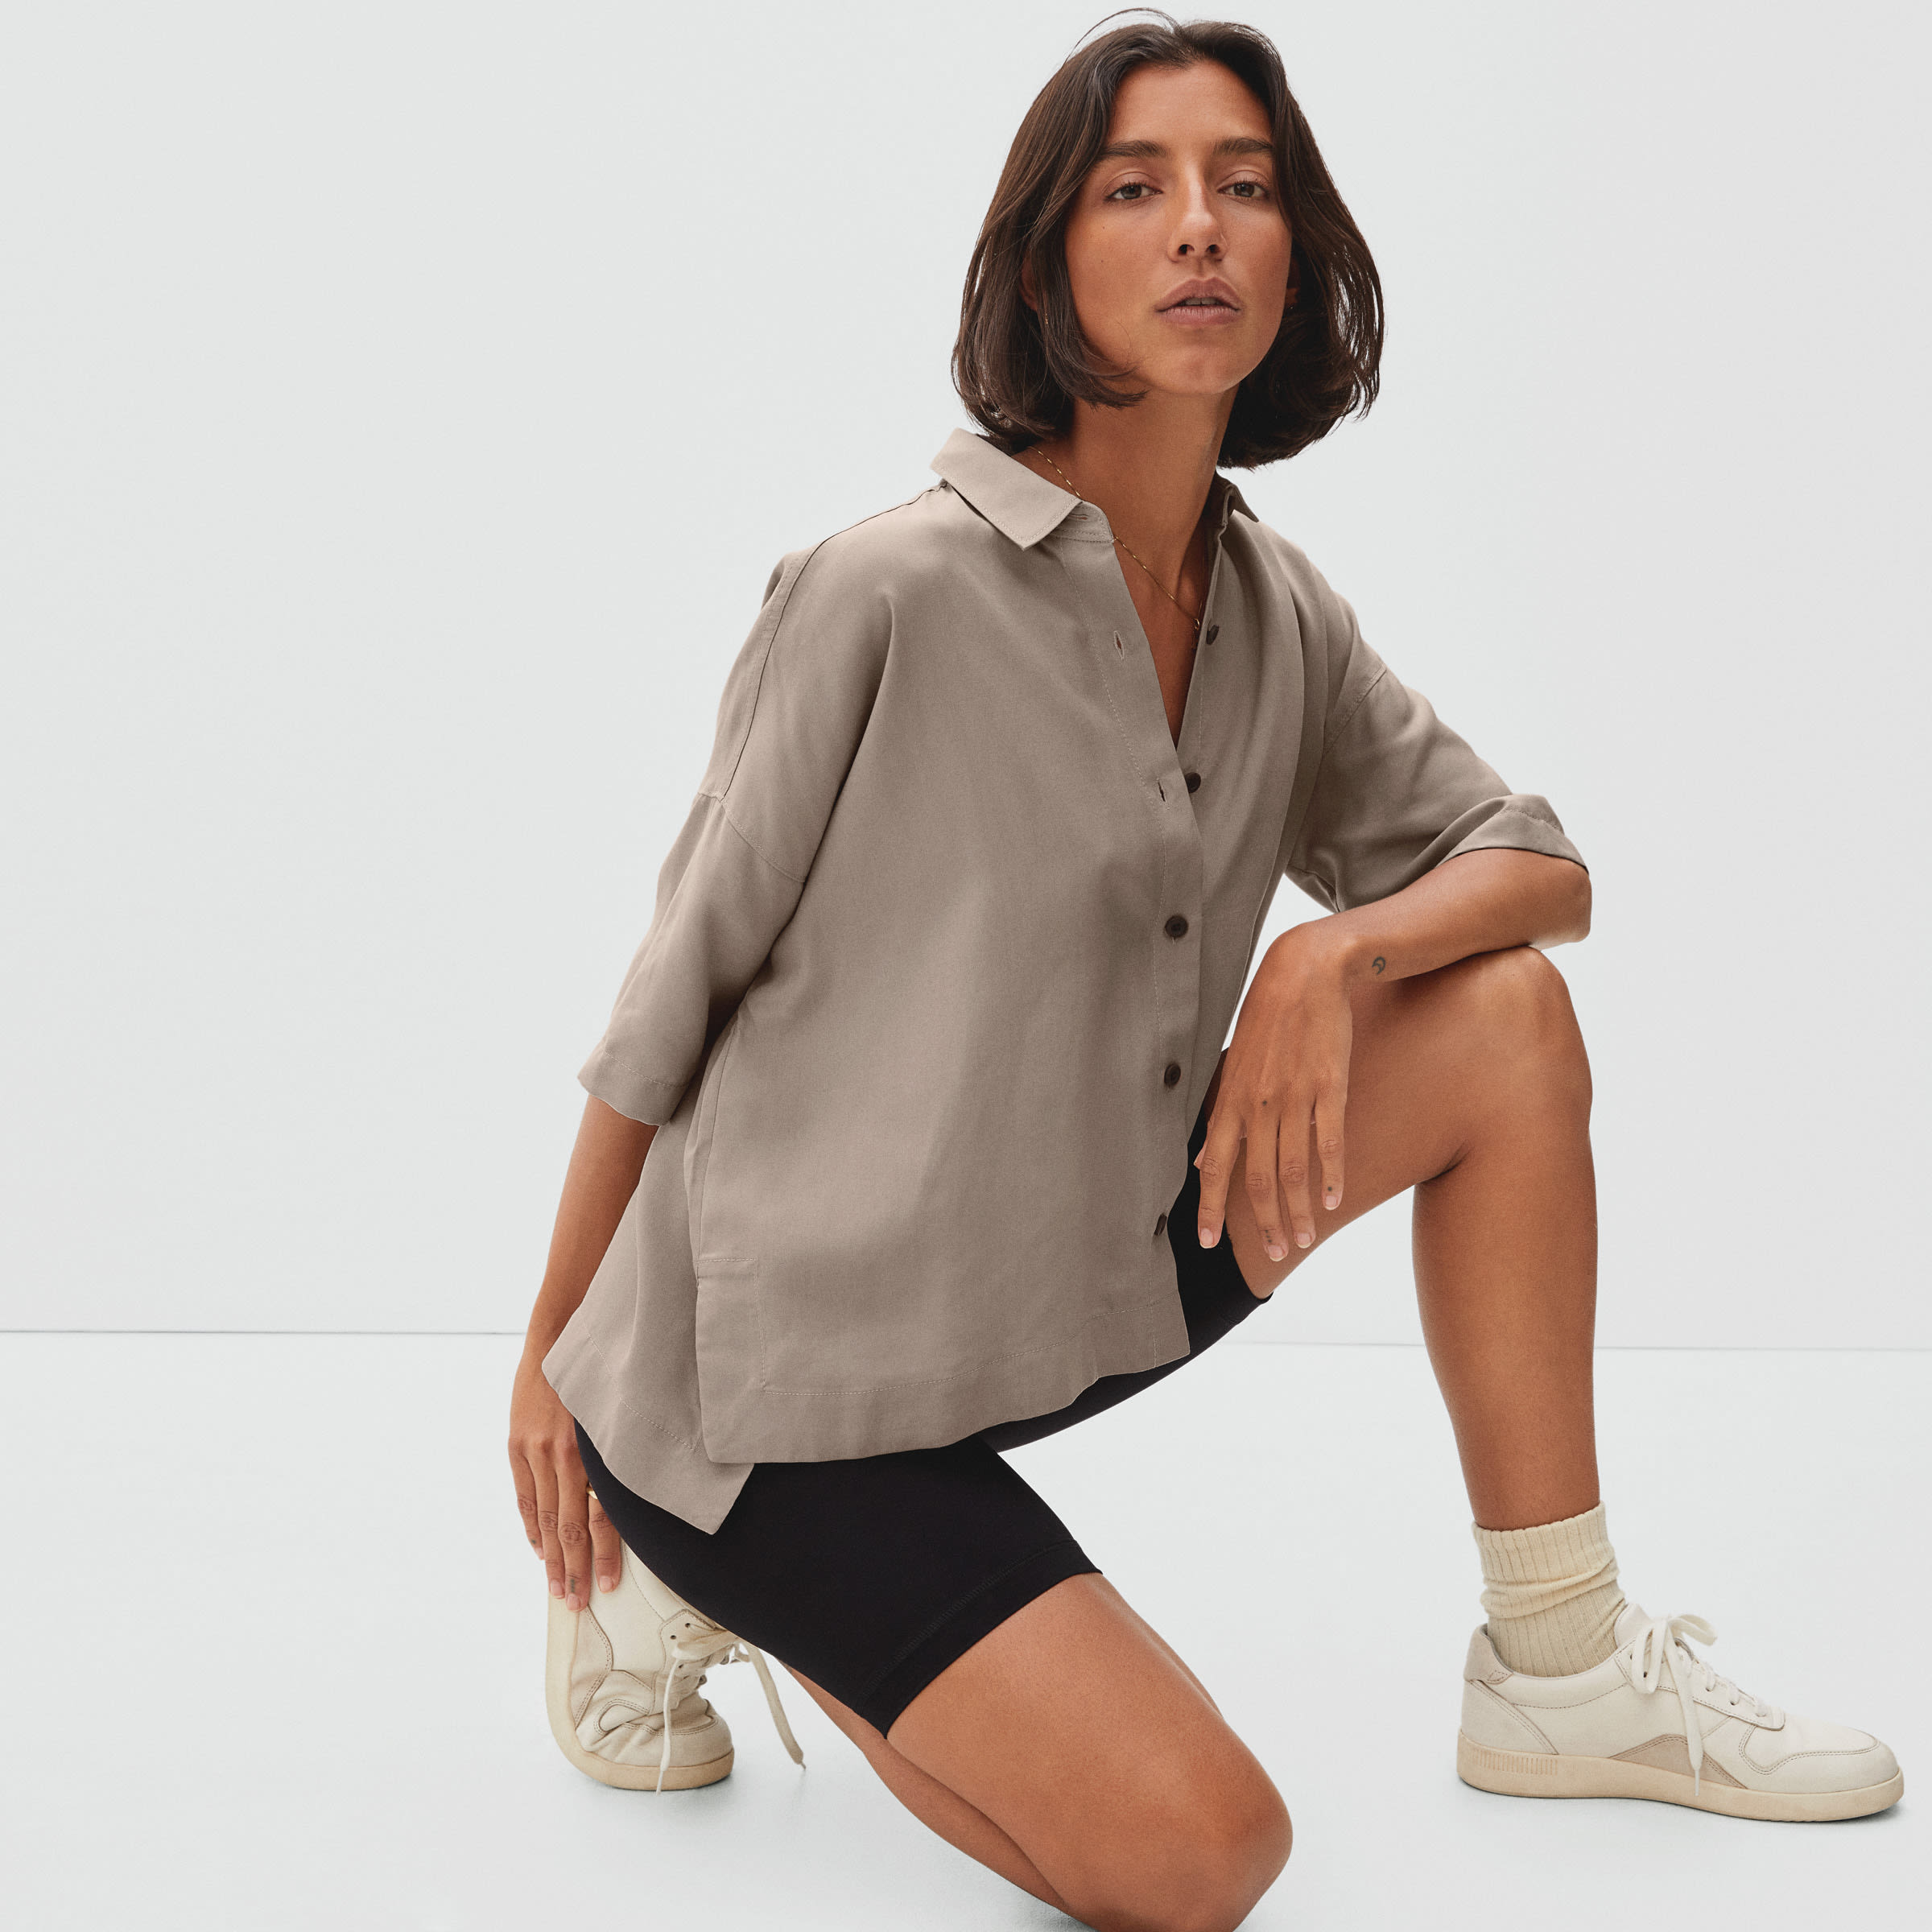 The Cotton High-Rise Hipster Burnt Sugar – Everlane